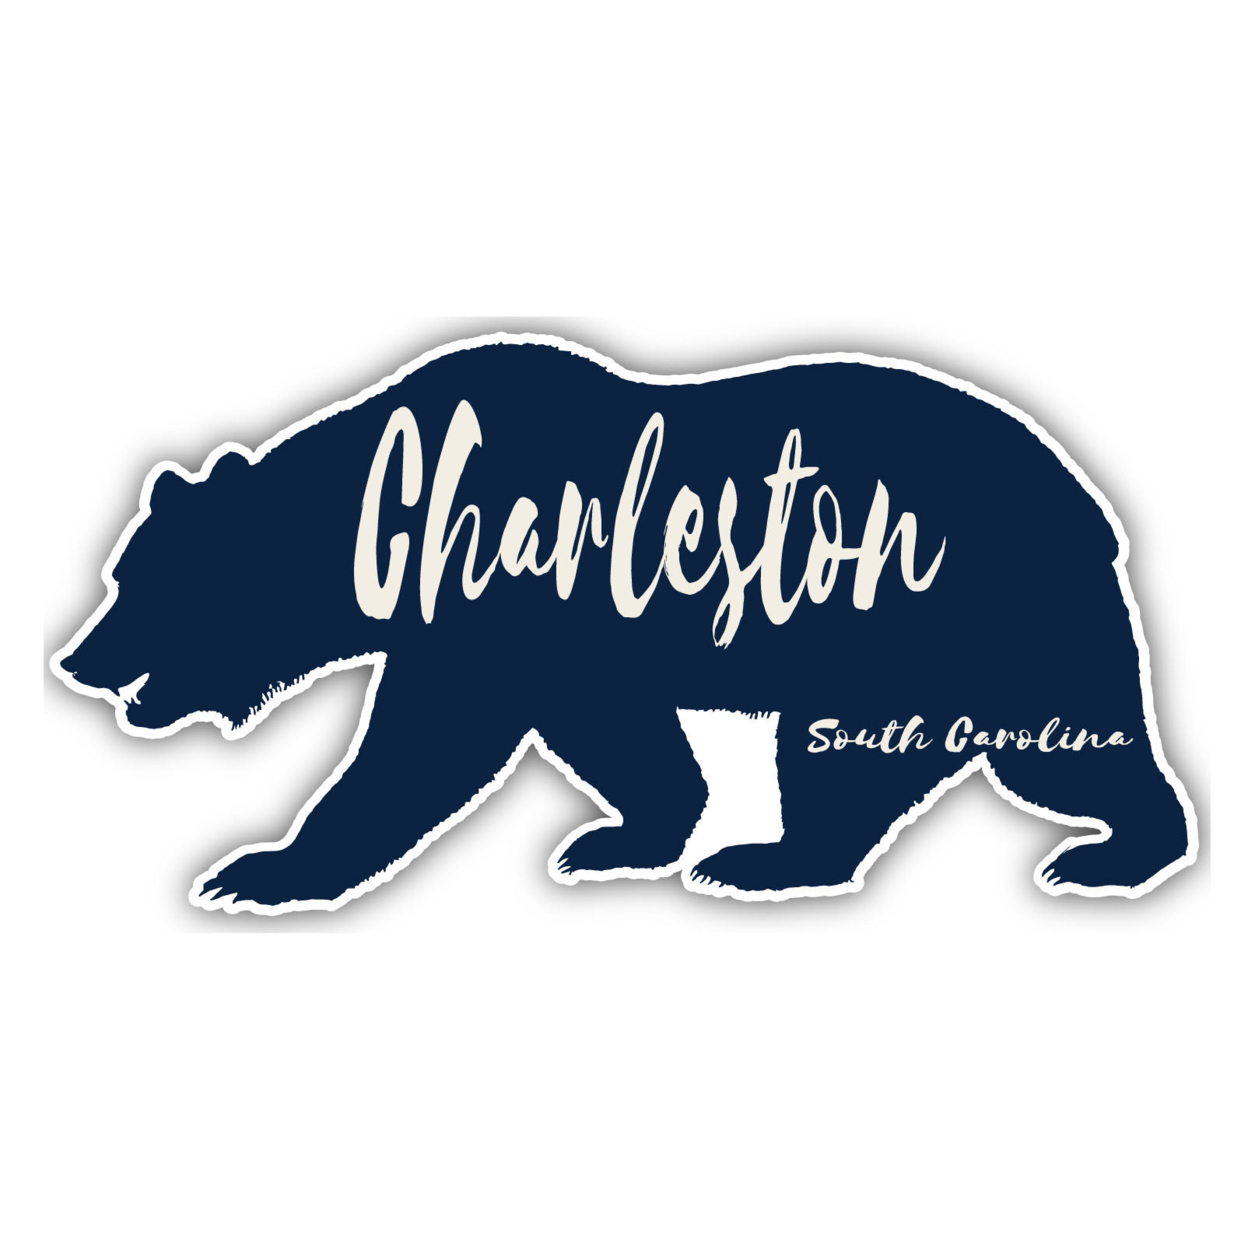 Charleston South Carolina Souvenir Decorative Stickers (Choose Theme And Size) - 4-Pack, 2-Inch, Tent